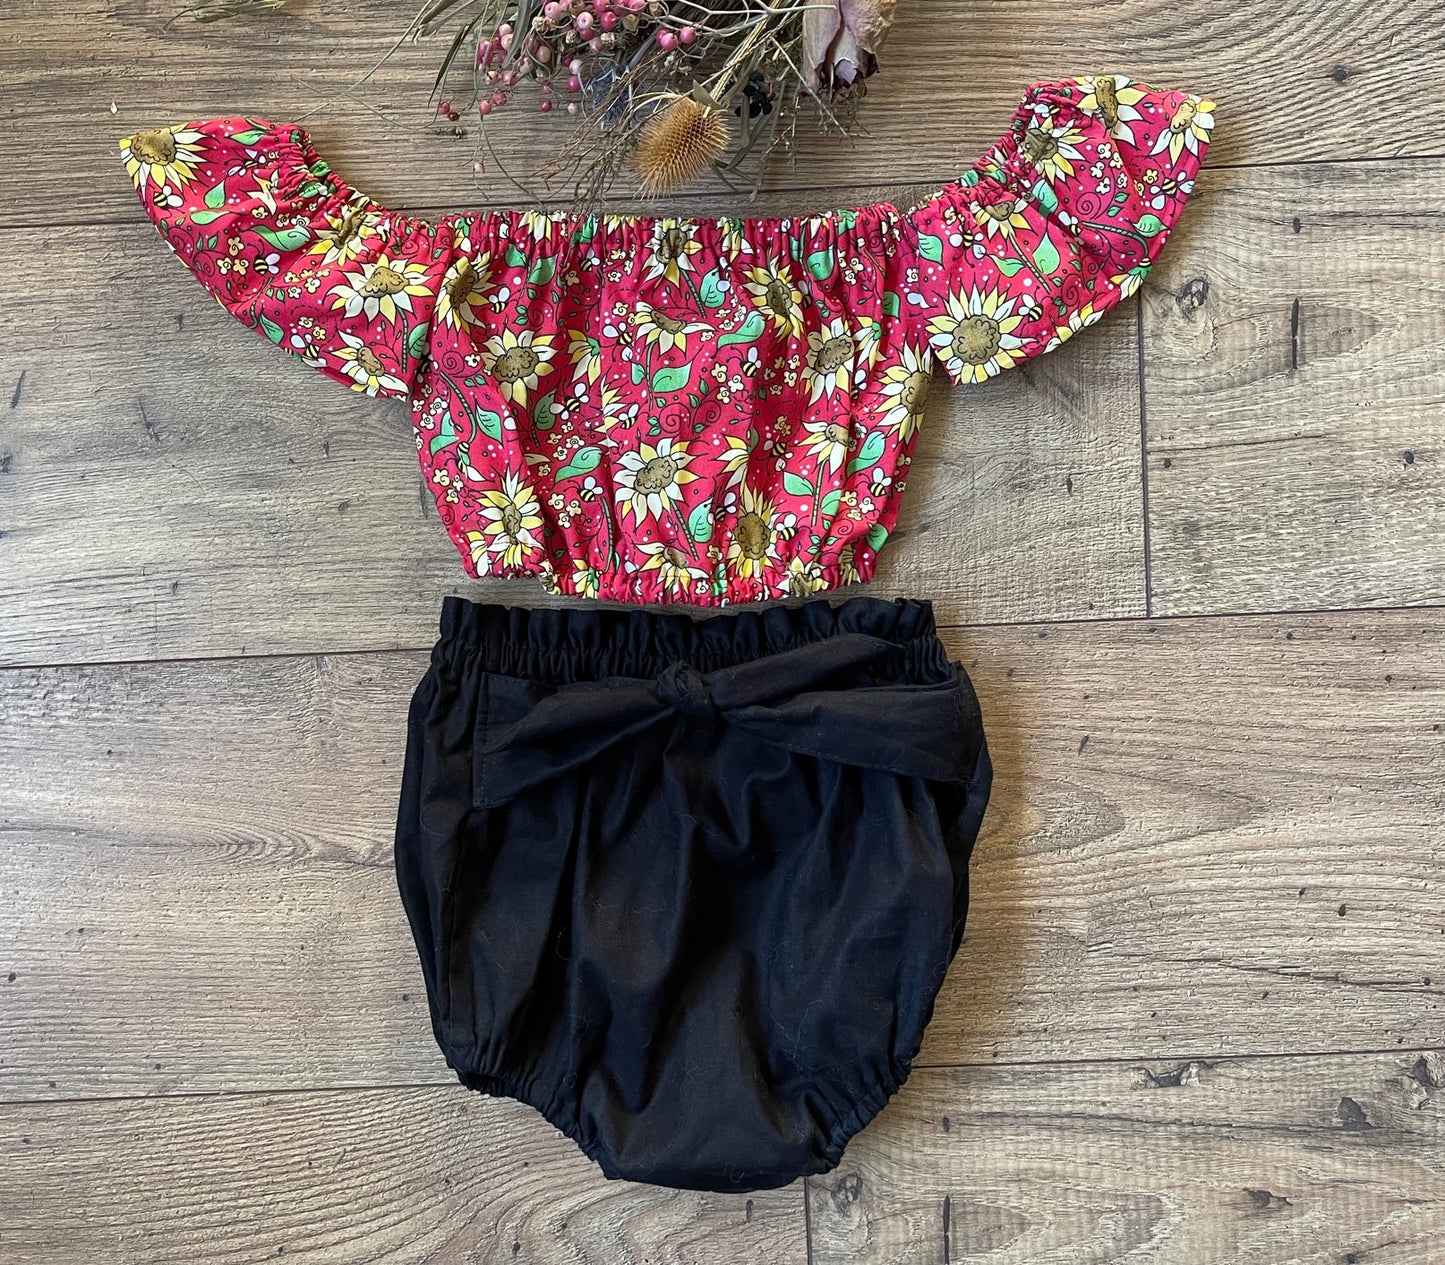 Girls Infant Toddler 2 Piece Floral Sunflowers Red Boho Style Outfit Off the Shoulder Top Black Bloomers Diaper Cover